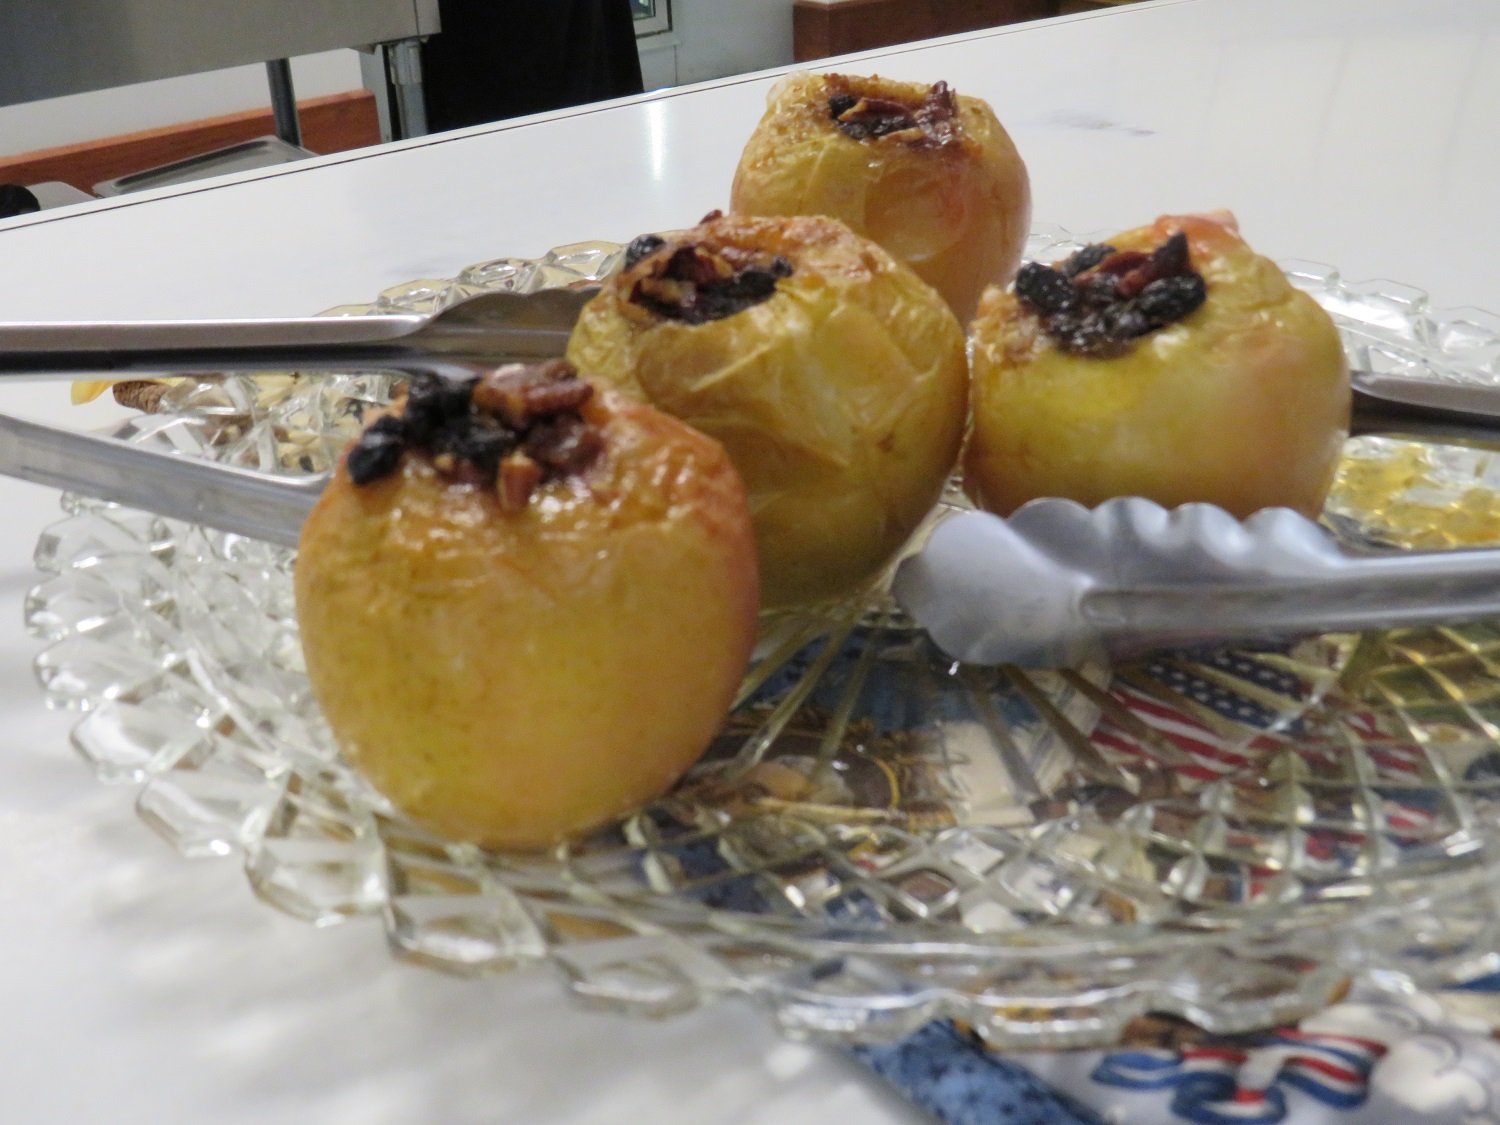  Everyone enjoyed the special baked apples at lunch! 